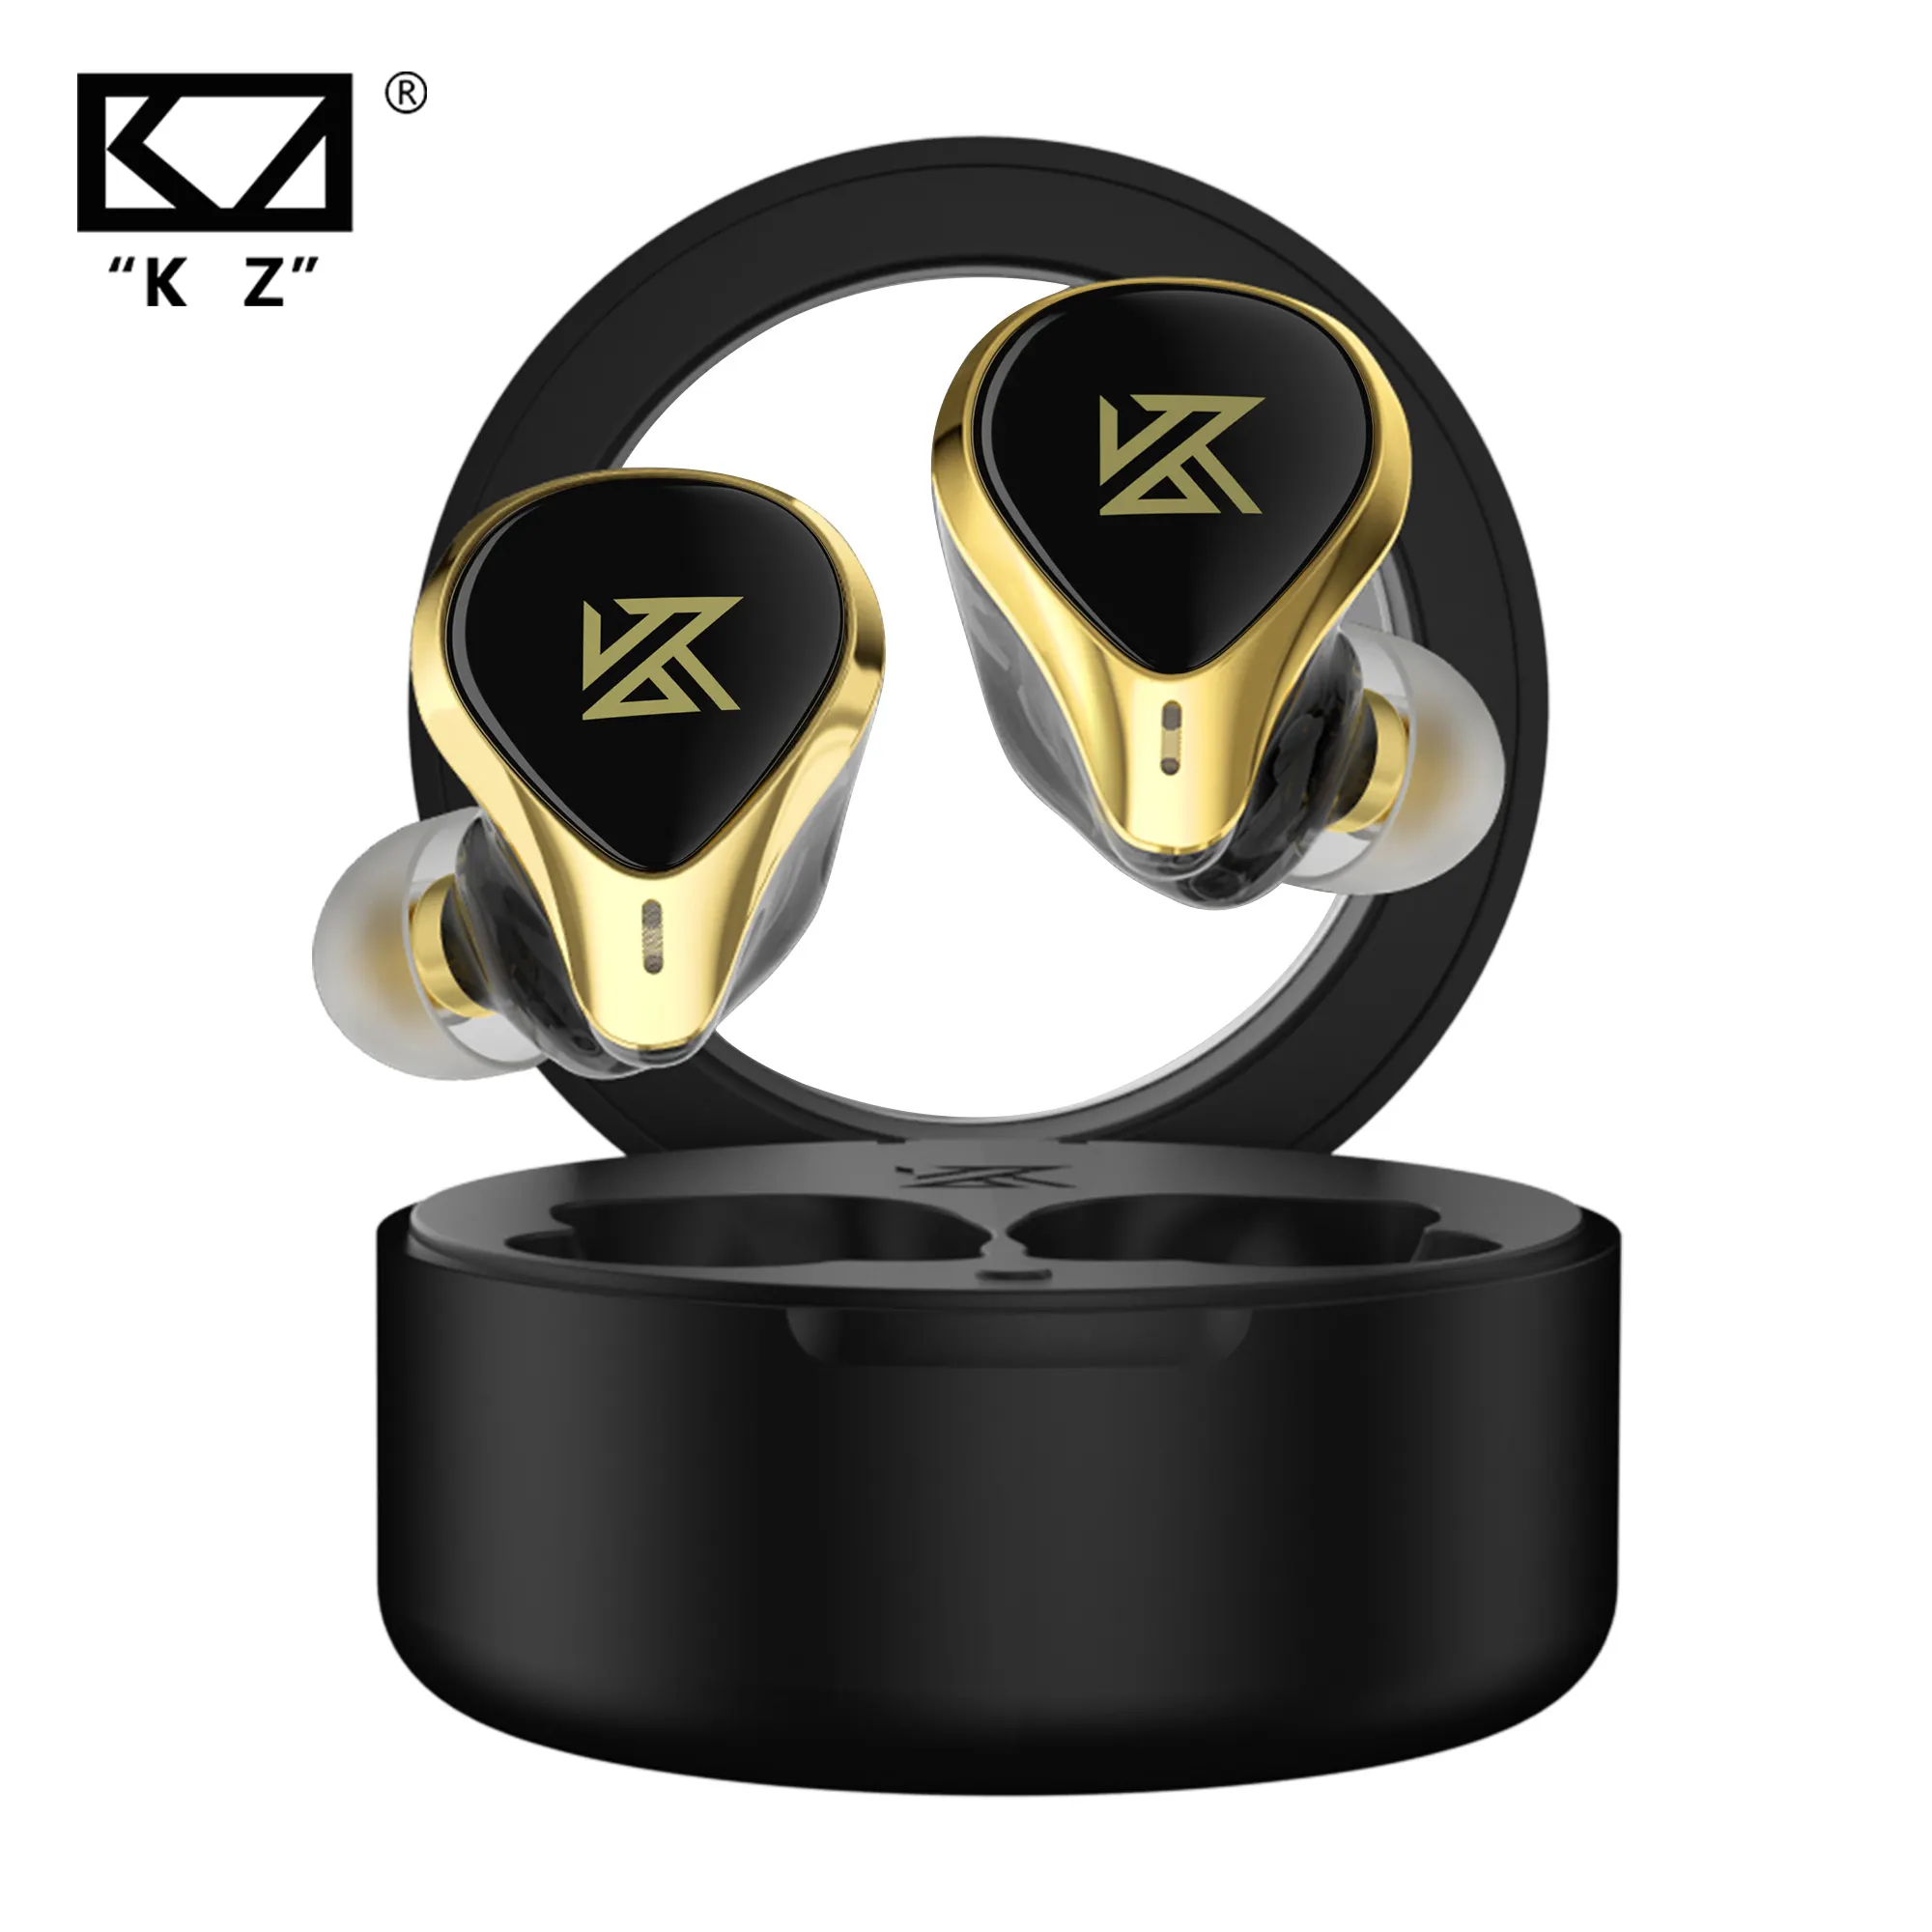 KZ SA08 Pro TWS True Wireless BT V5.2 Earphones 8BA Units Game Earbuds Touch Control Noise Cancelling Sport Headset